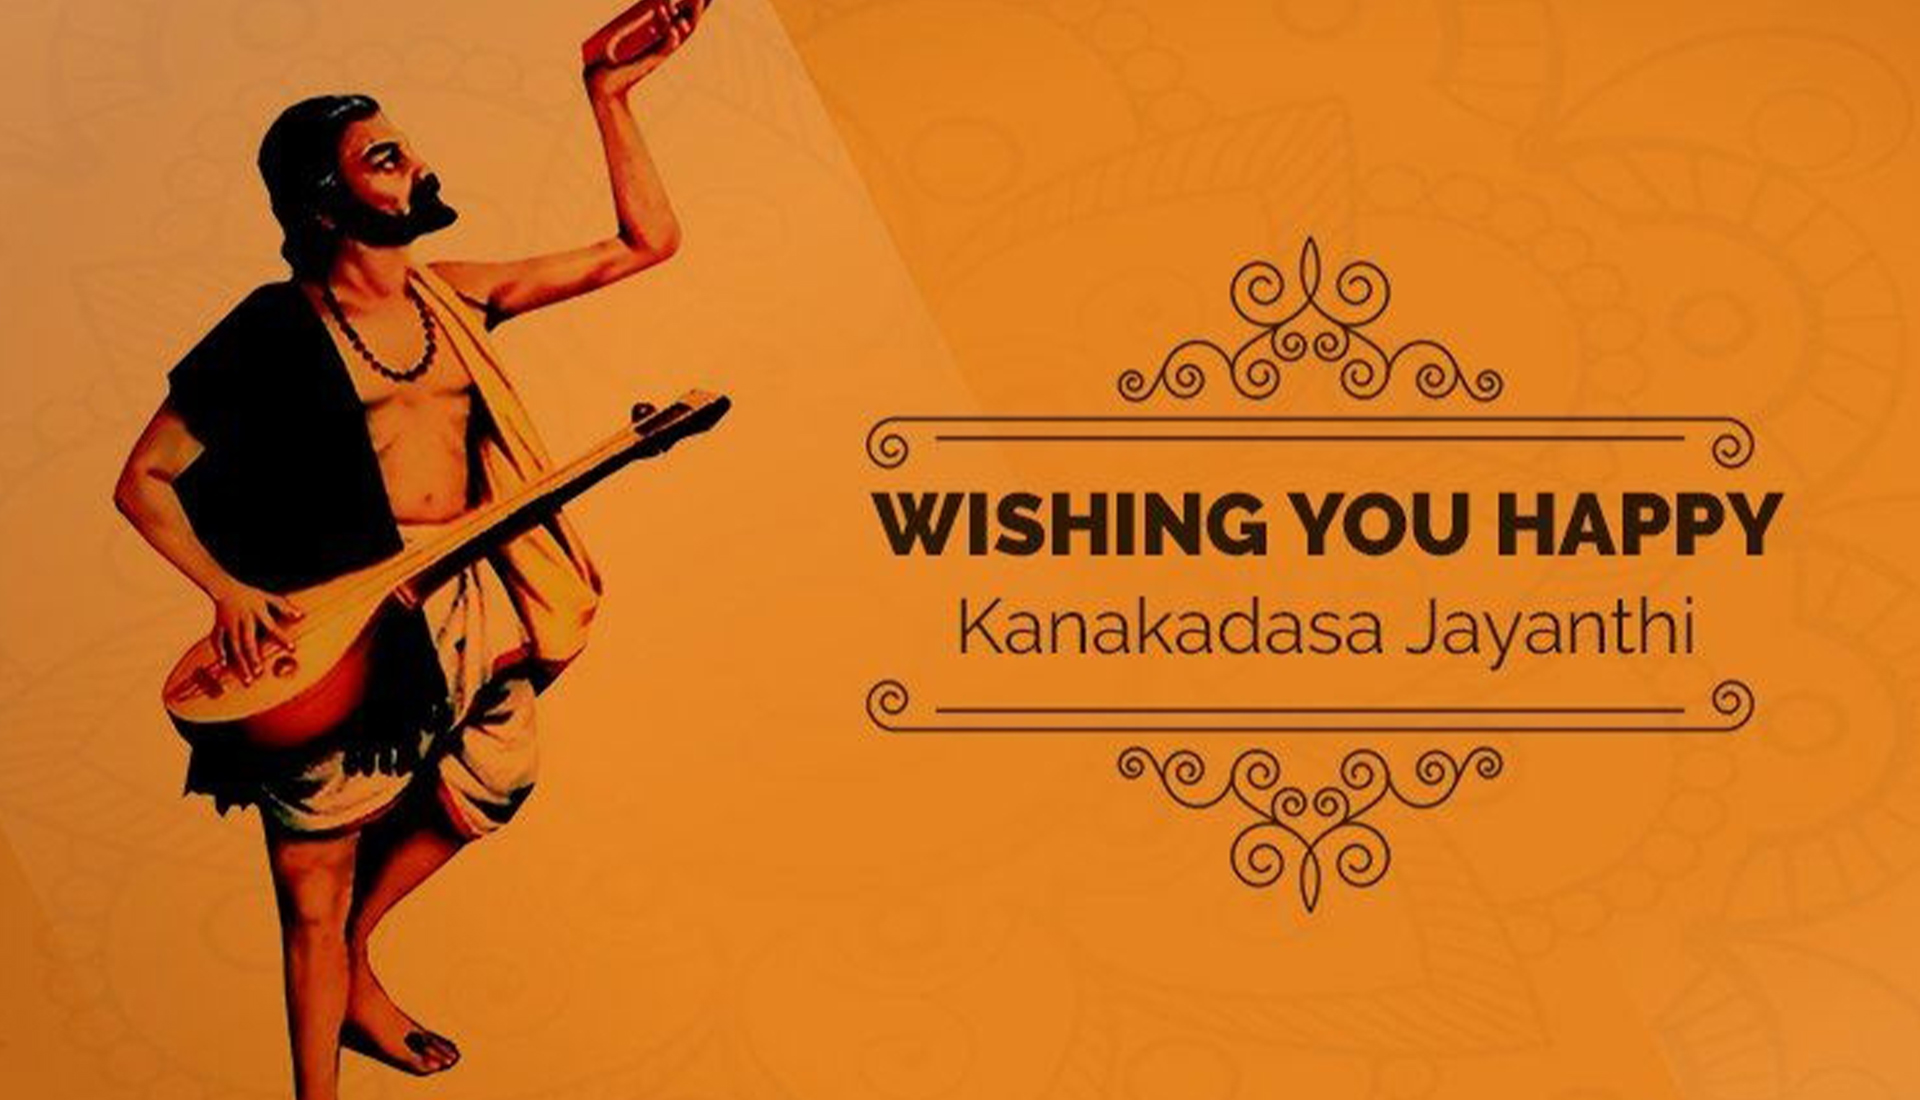 Cycle Pure - This year Kanakadasa Jayanti is celebrated on 15th November,  in honour of Kanaka Dasa one of Karnataka's greatest philosopher and a  poet, whose melodic songs in simple language are